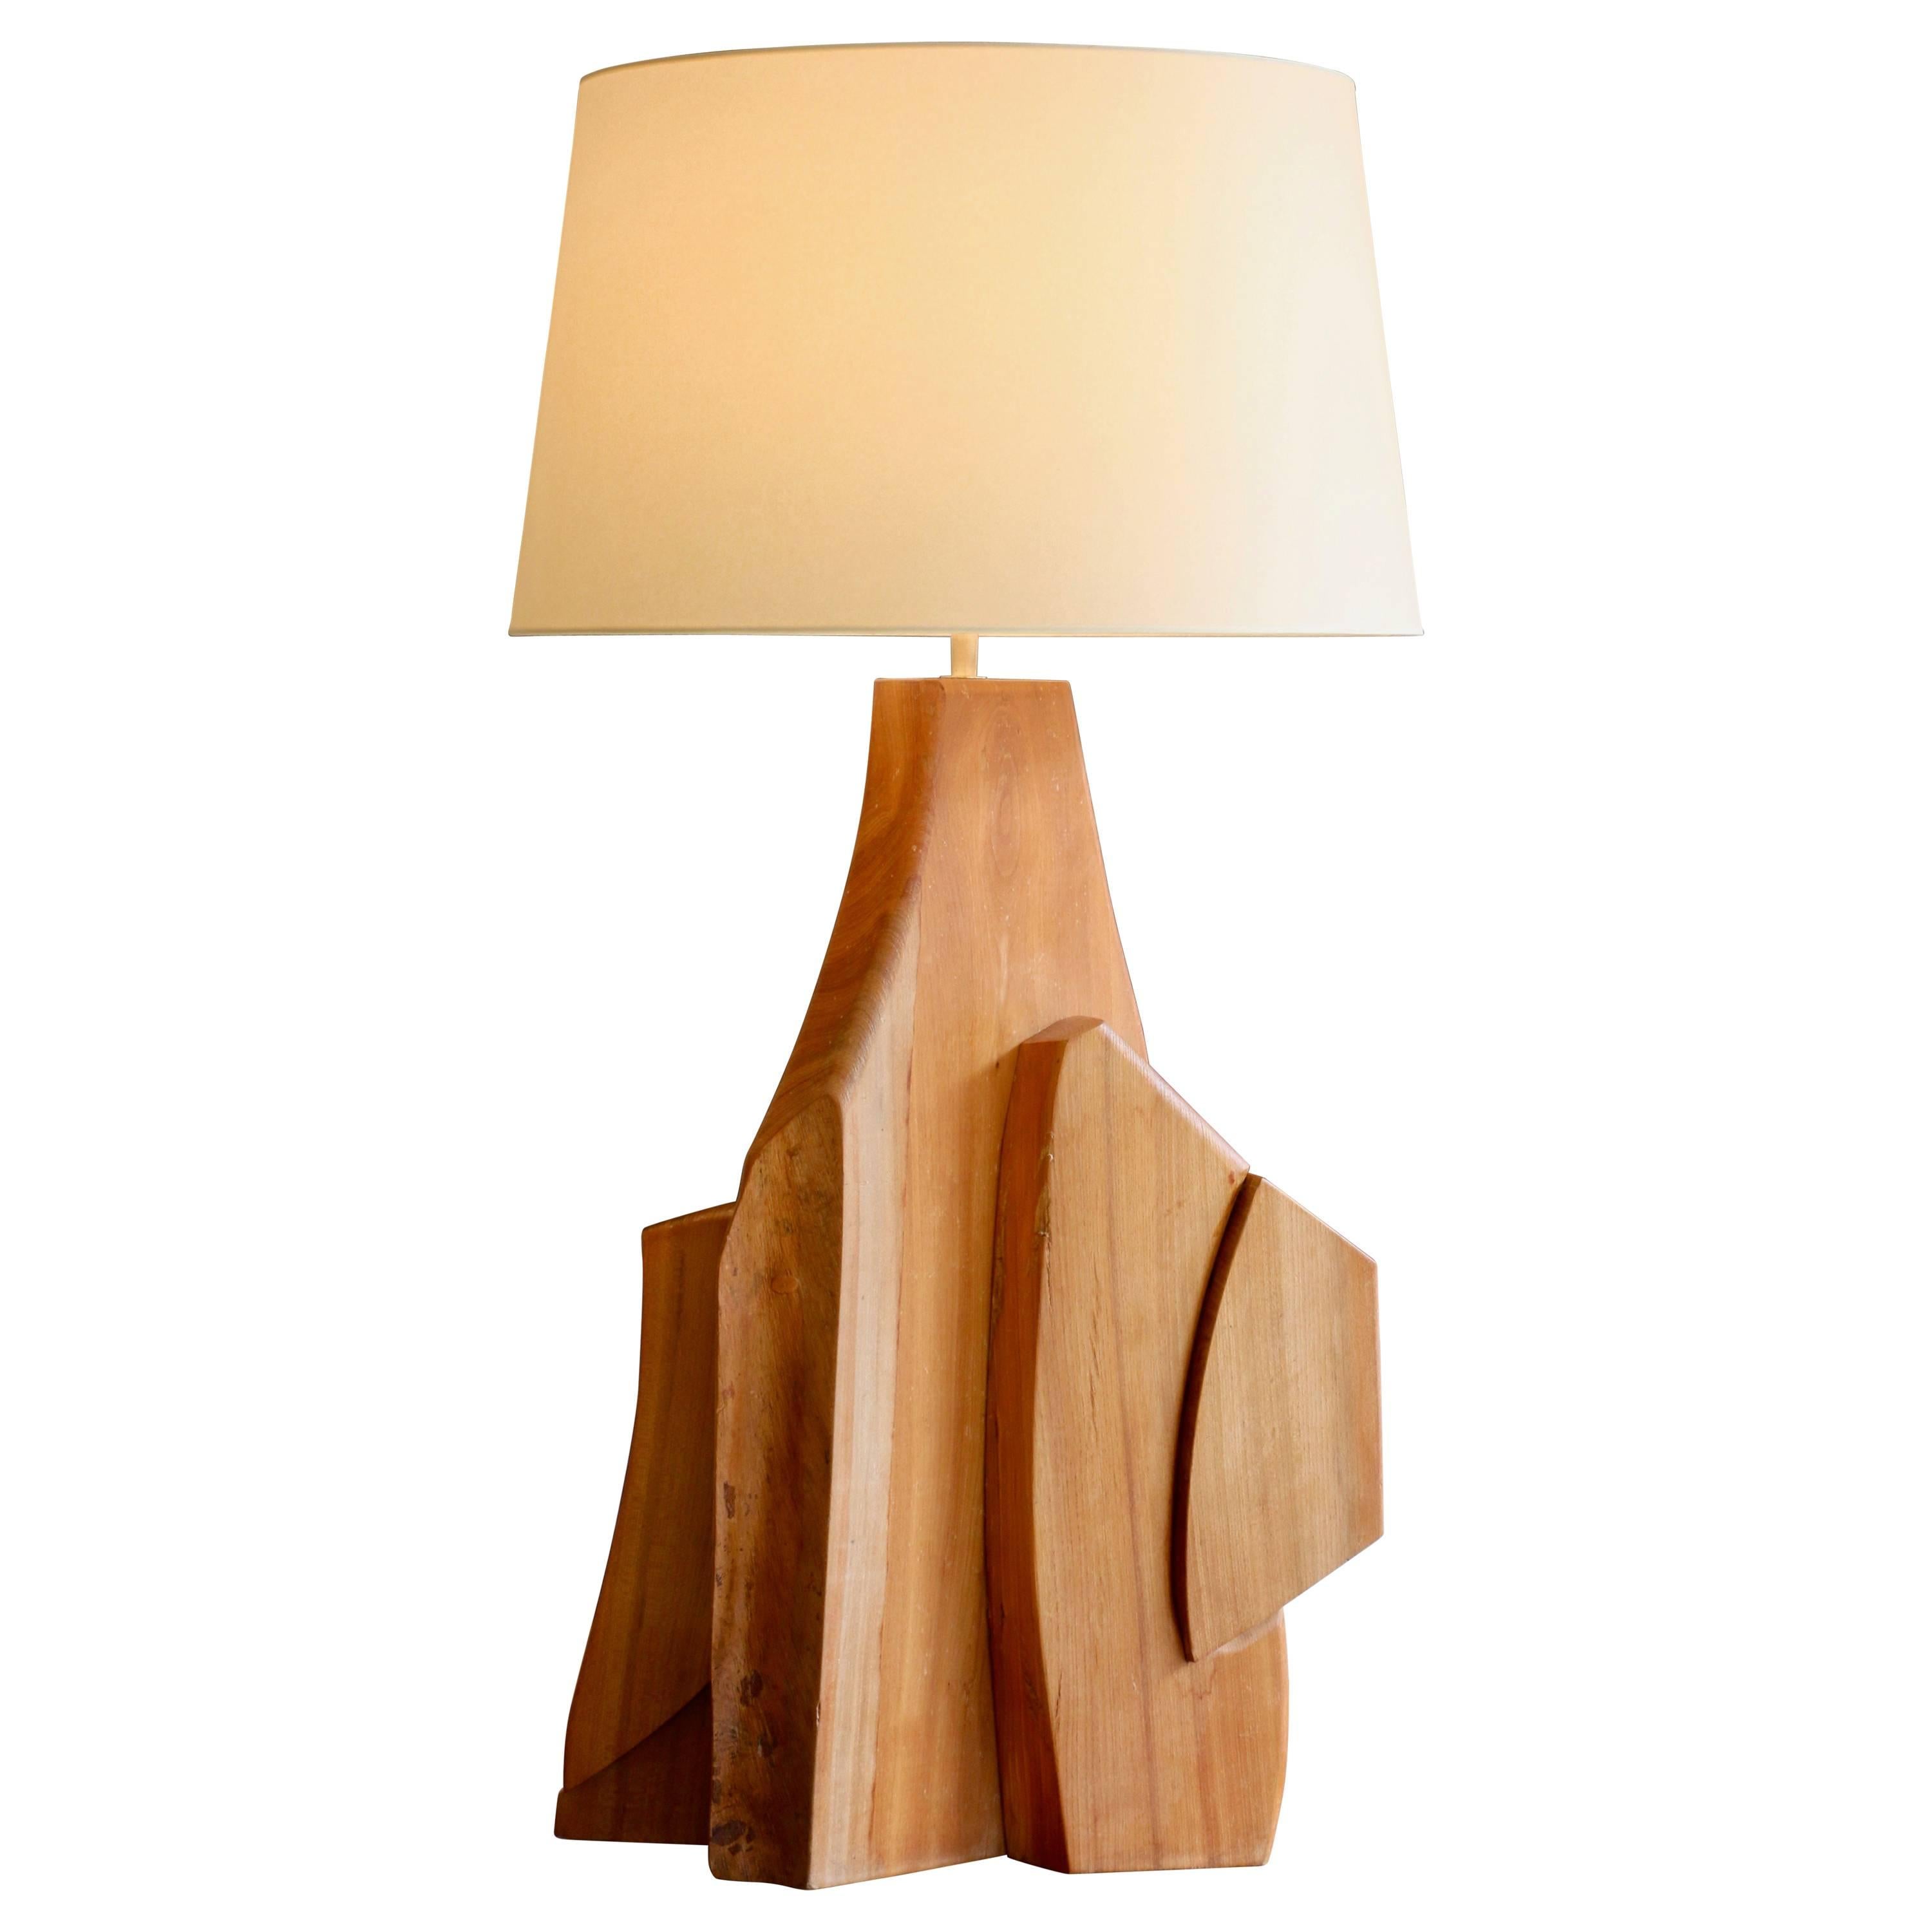 Large Wood Sculpture Table Lamp